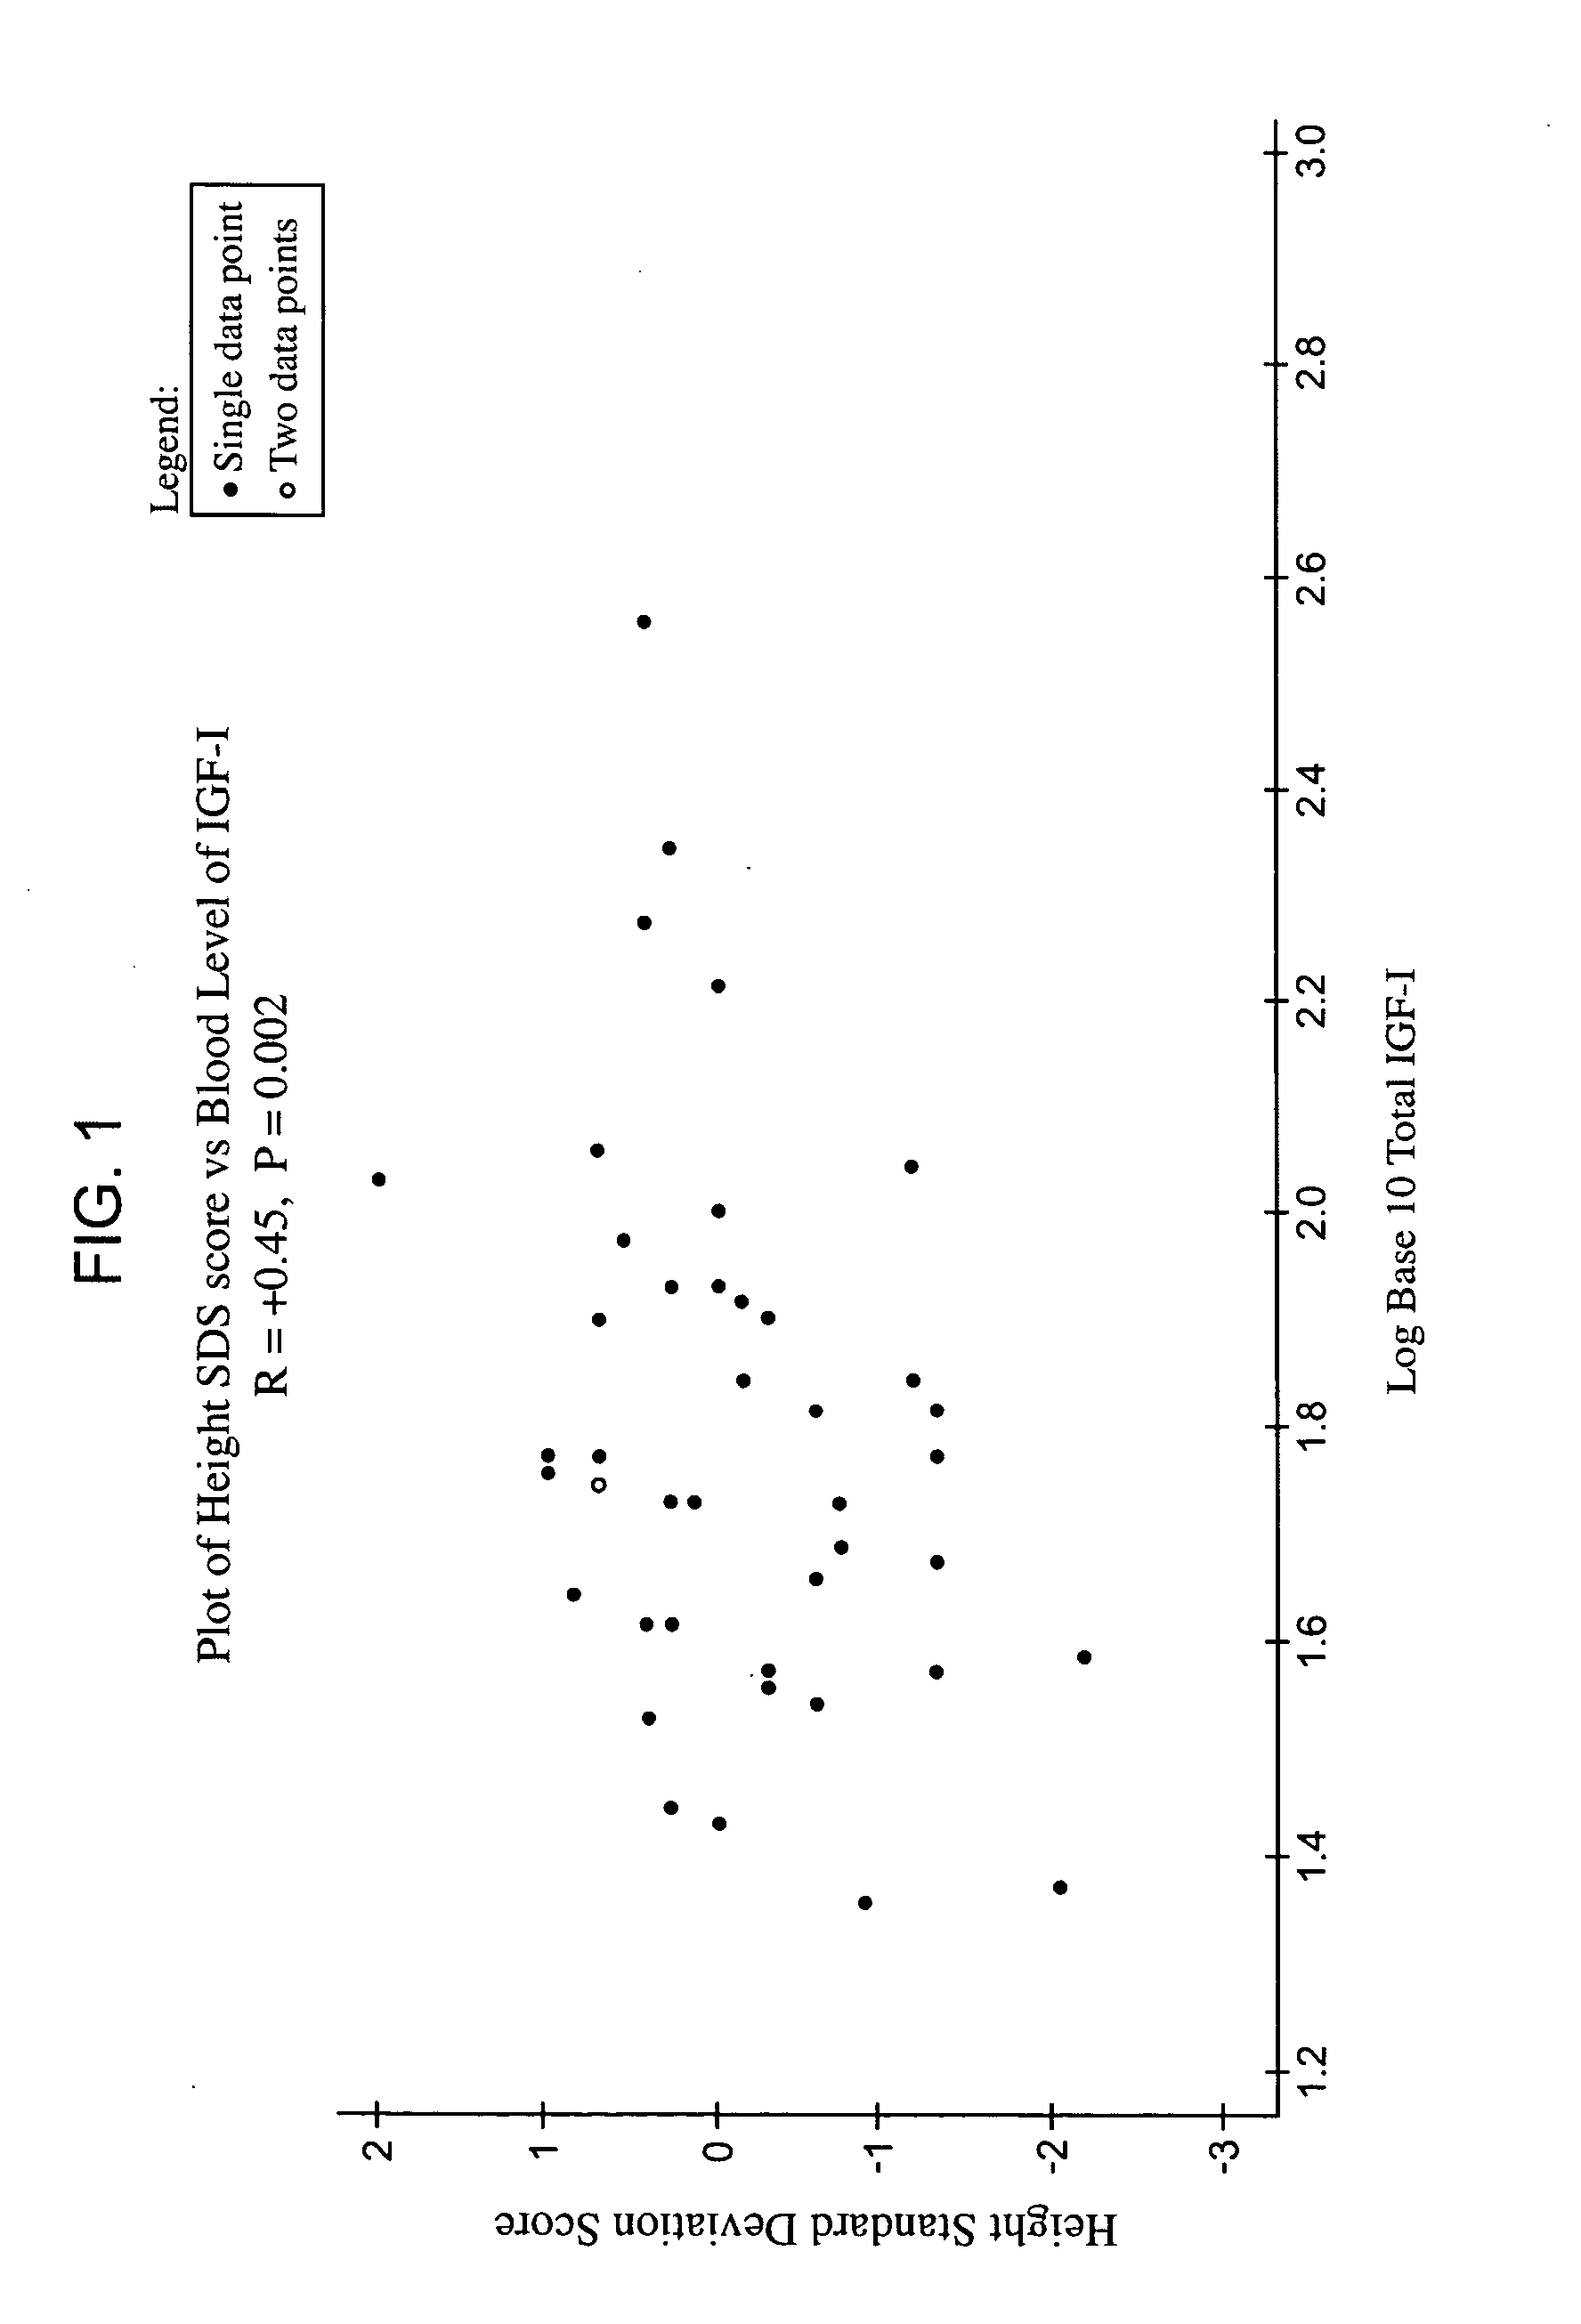 Methods for treatment of insulin-like growth factor-1 (IGF-1) deficiency